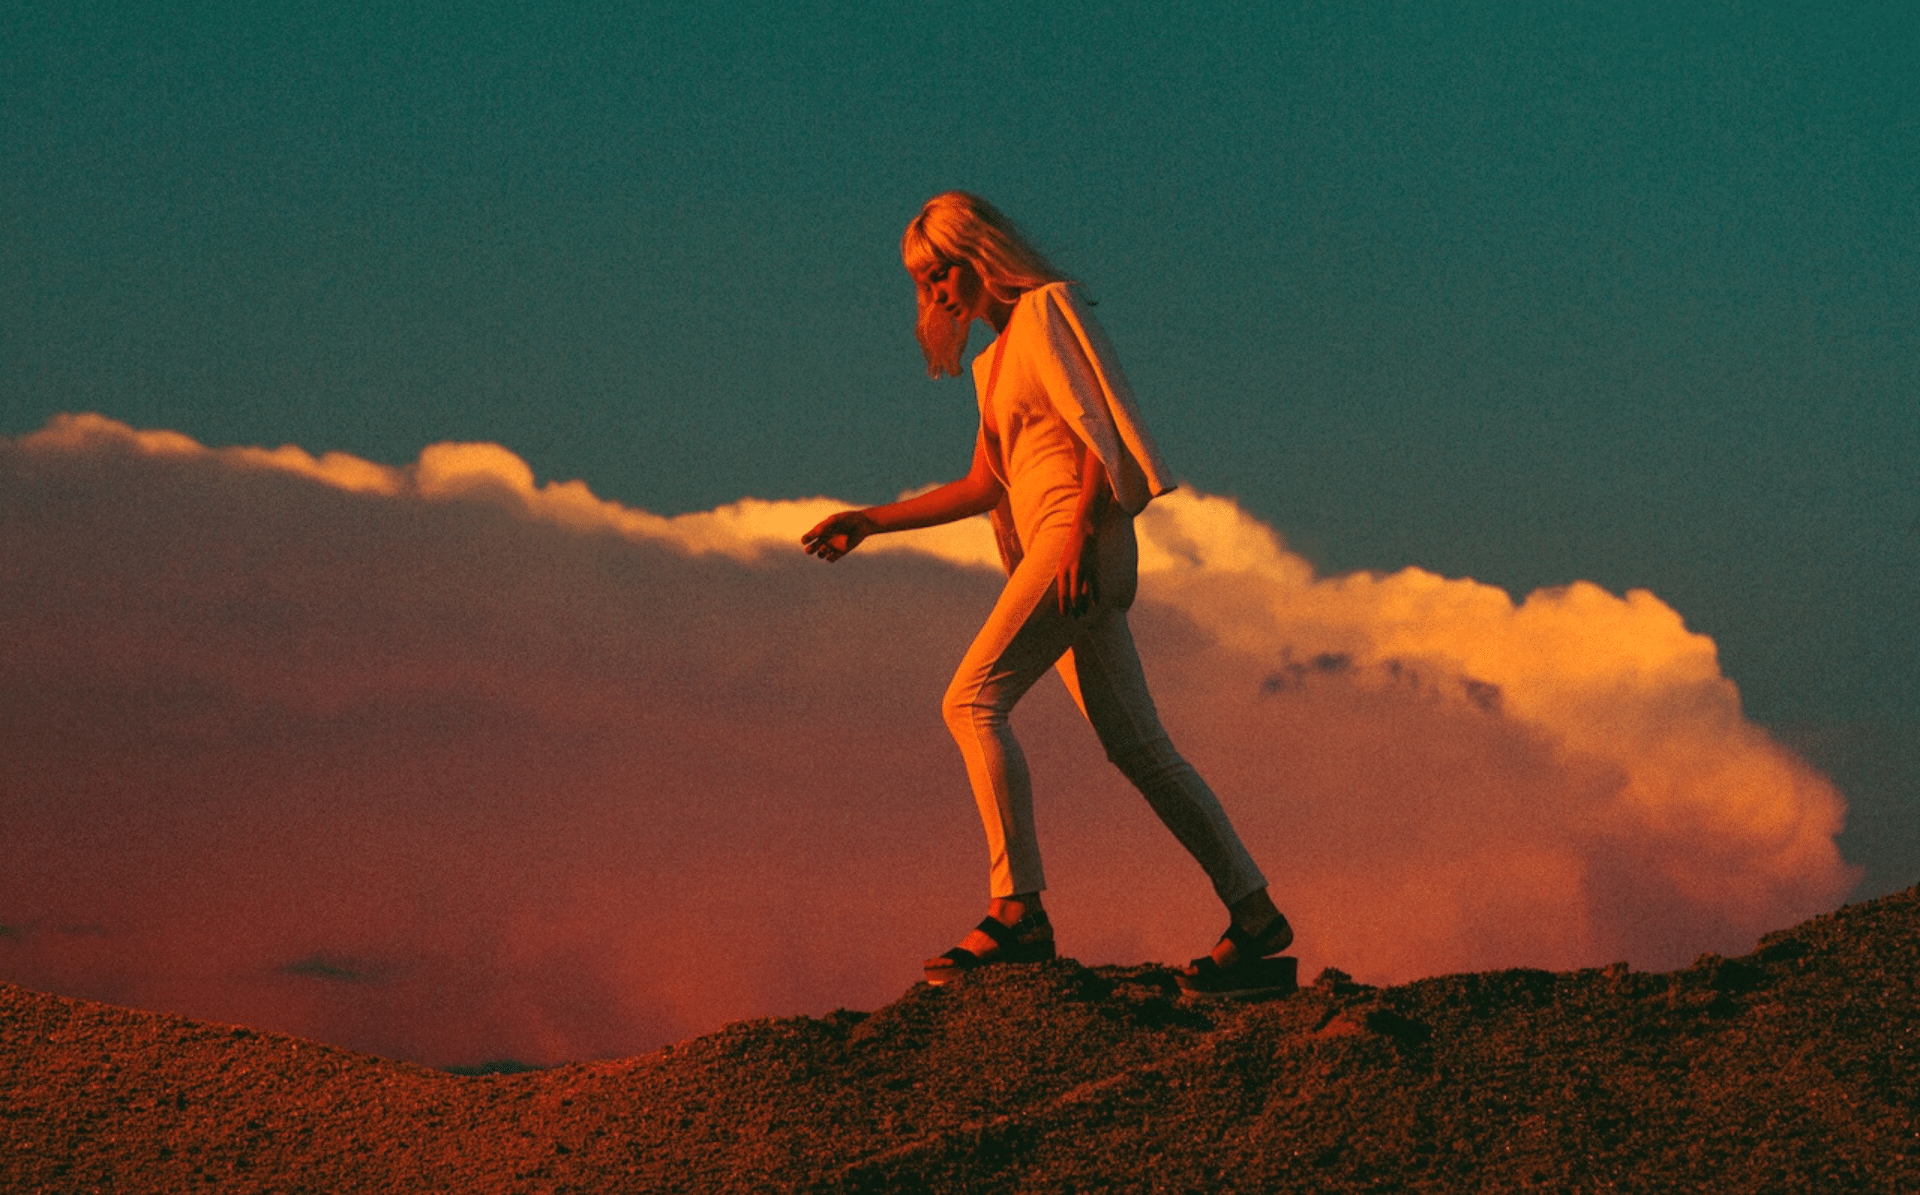 A woman with short blonde hair is hiking up a hill. She is wearing all white clothes, with a jacket draped over her shoulders. It is dusk and the golden hour light of the sun is hitting her. Behind her there is a massive red-tinted cloud with the blue sky peeking behind it.